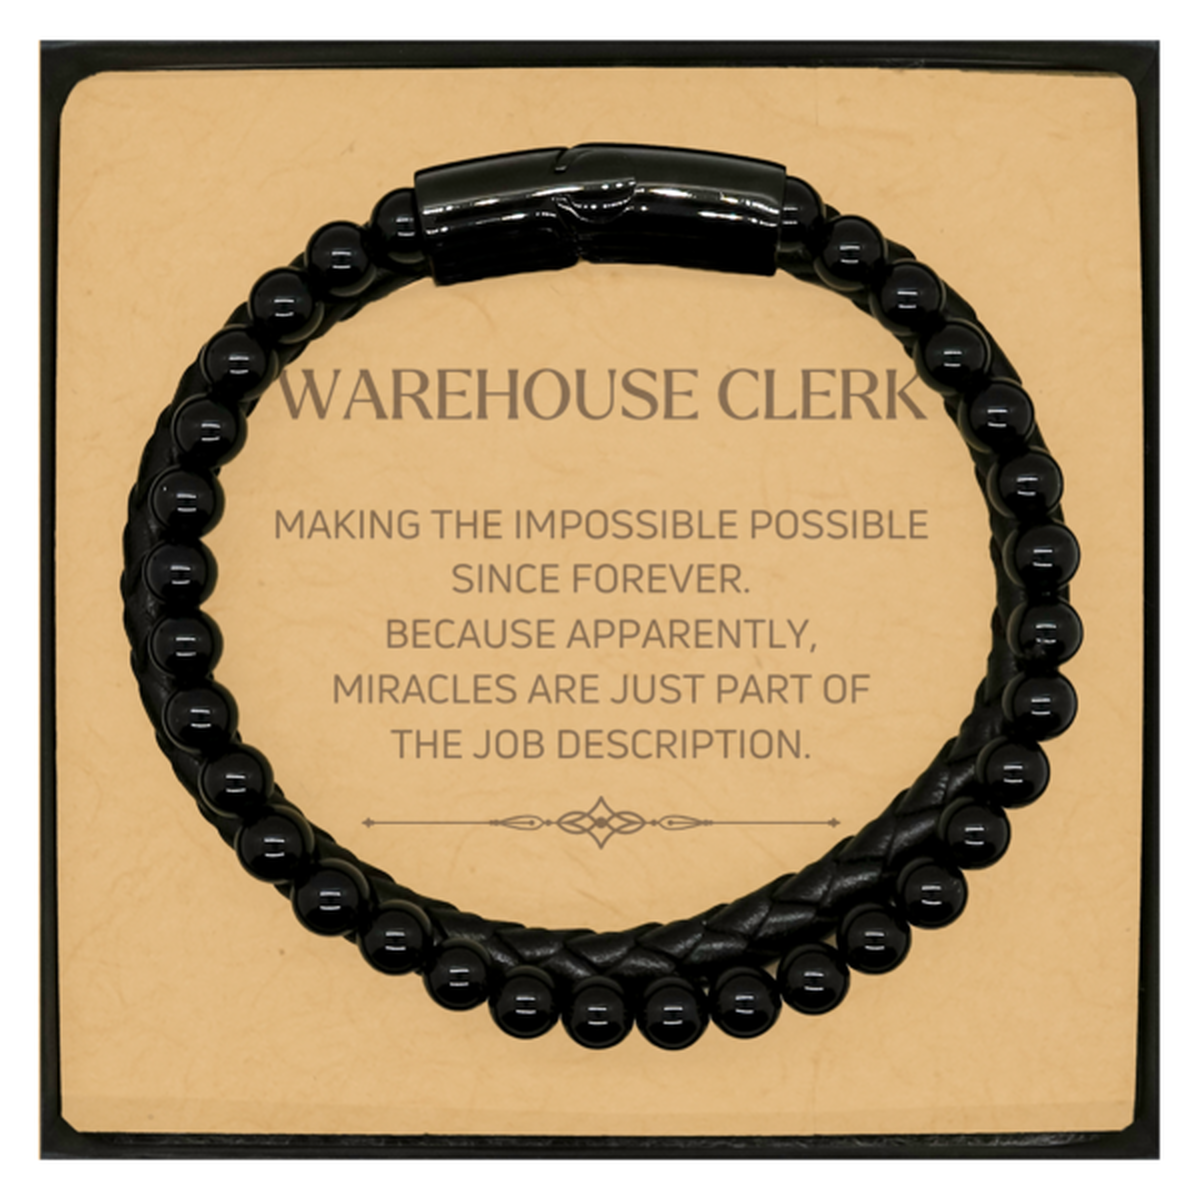 Funny Warehouse Clerk Gifts, Miracles are just part of the job description, Inspirational Birthday Christmas Stone Leather Bracelets For Warehouse Clerk, Men, Women, Coworkers, Friends, Boss